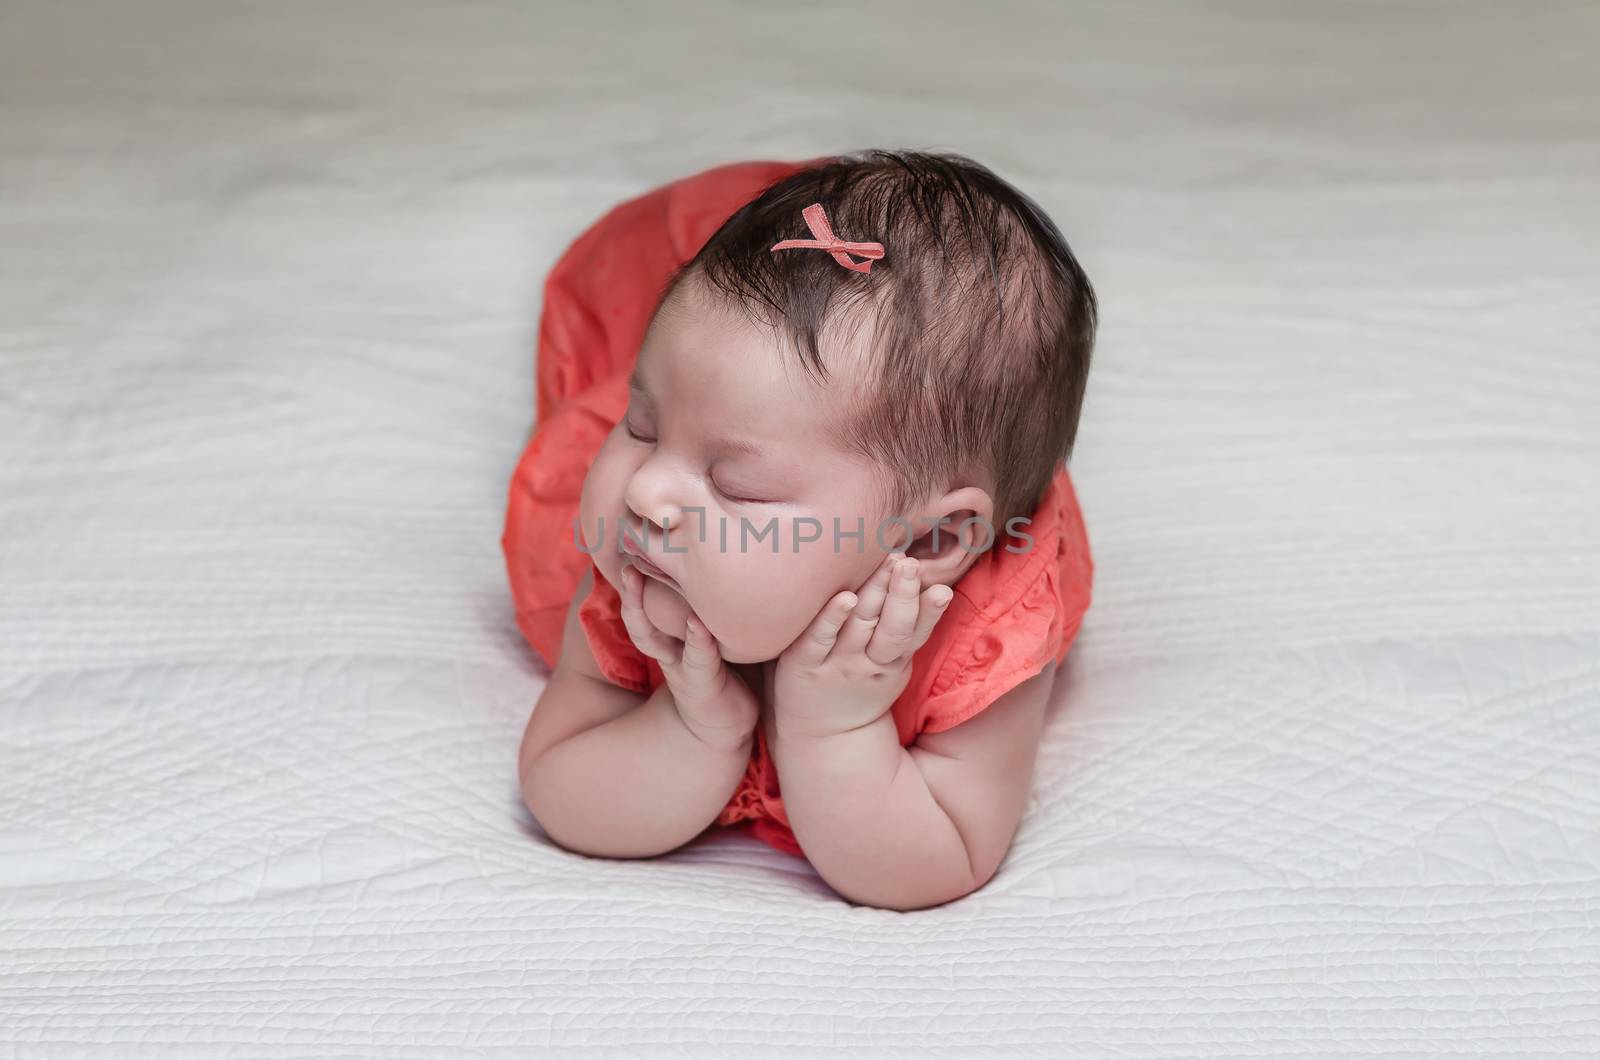 Beautiful newborn baby sleeping on her elbows and hands by doble.d